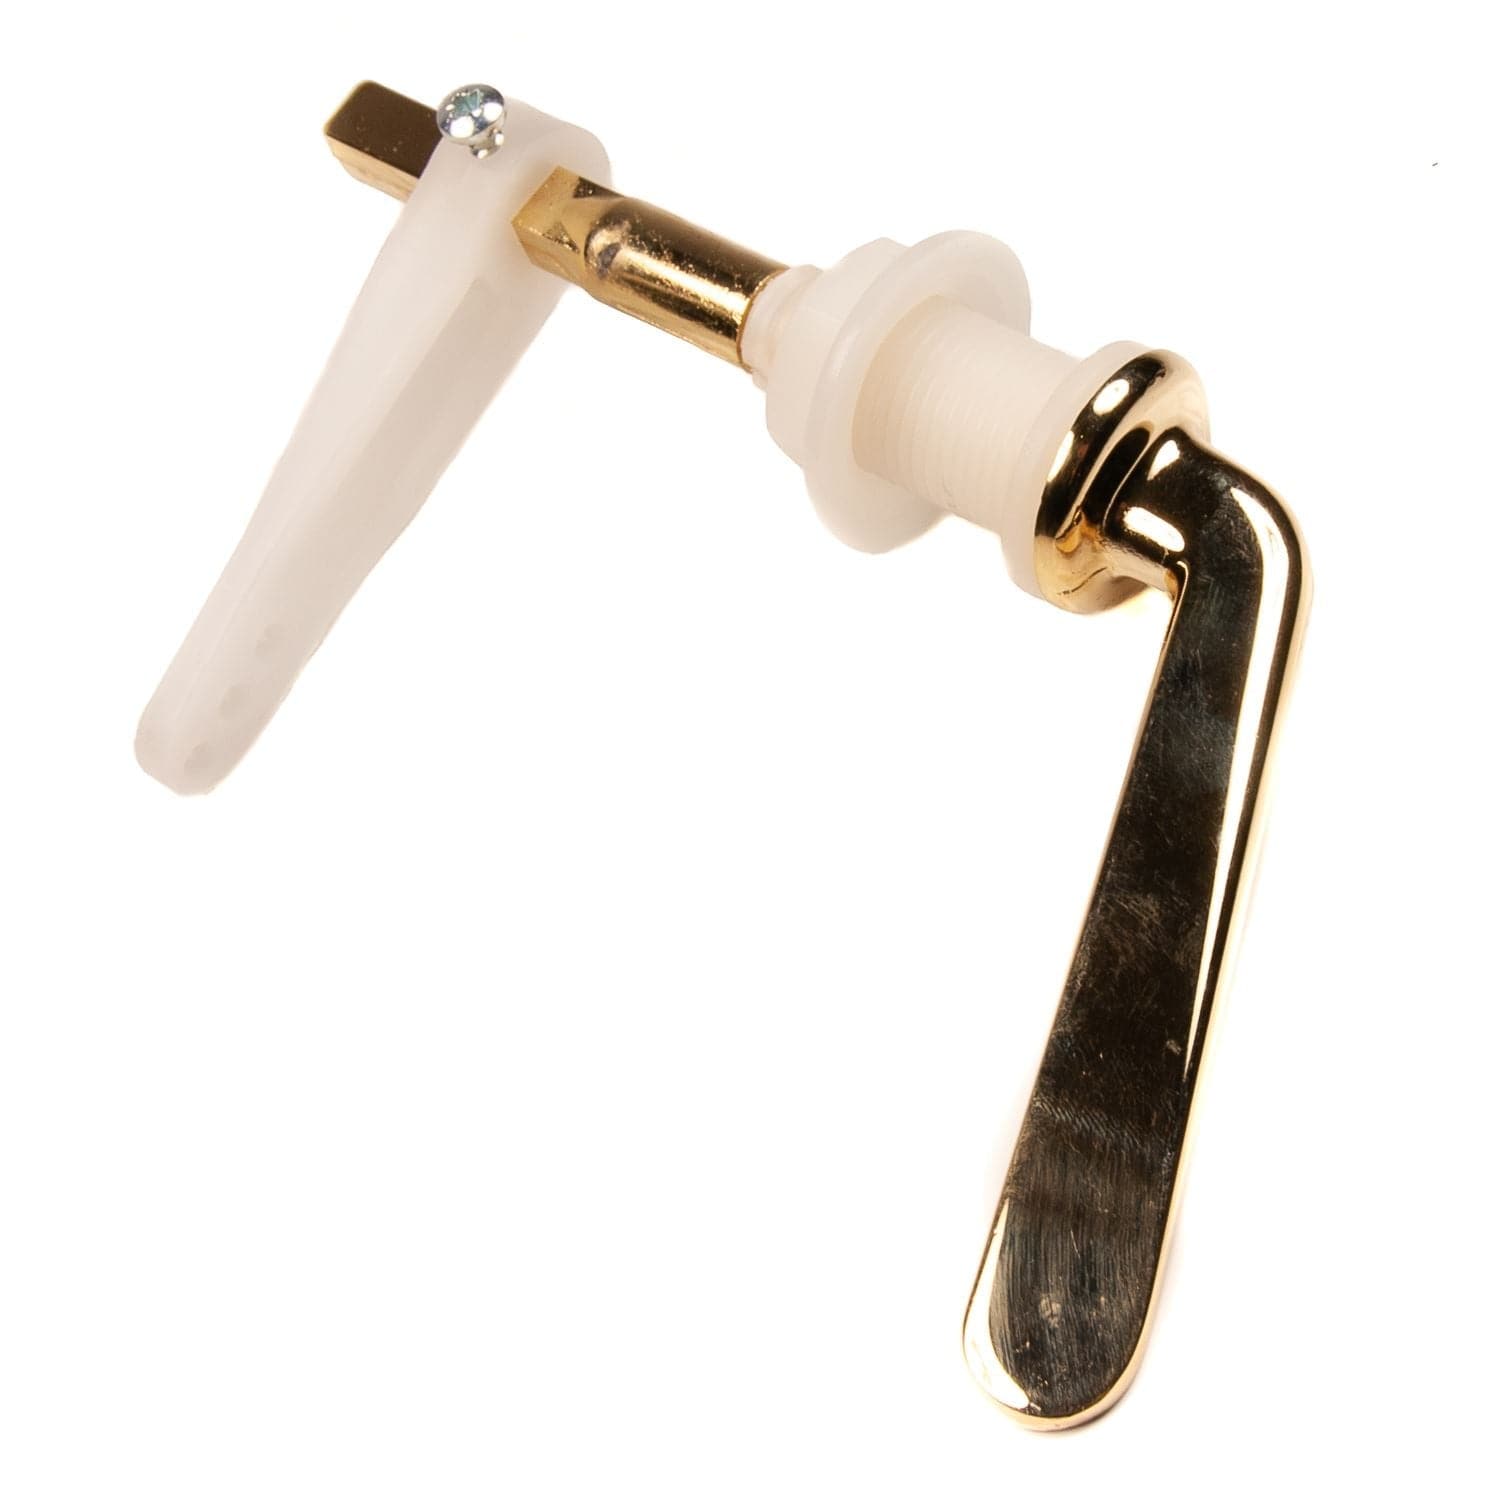 Cistern Toilet Lever Handle Brass Finish Standard Front Lever 110mm Spindle Cistern Levers Thunderfix 100294